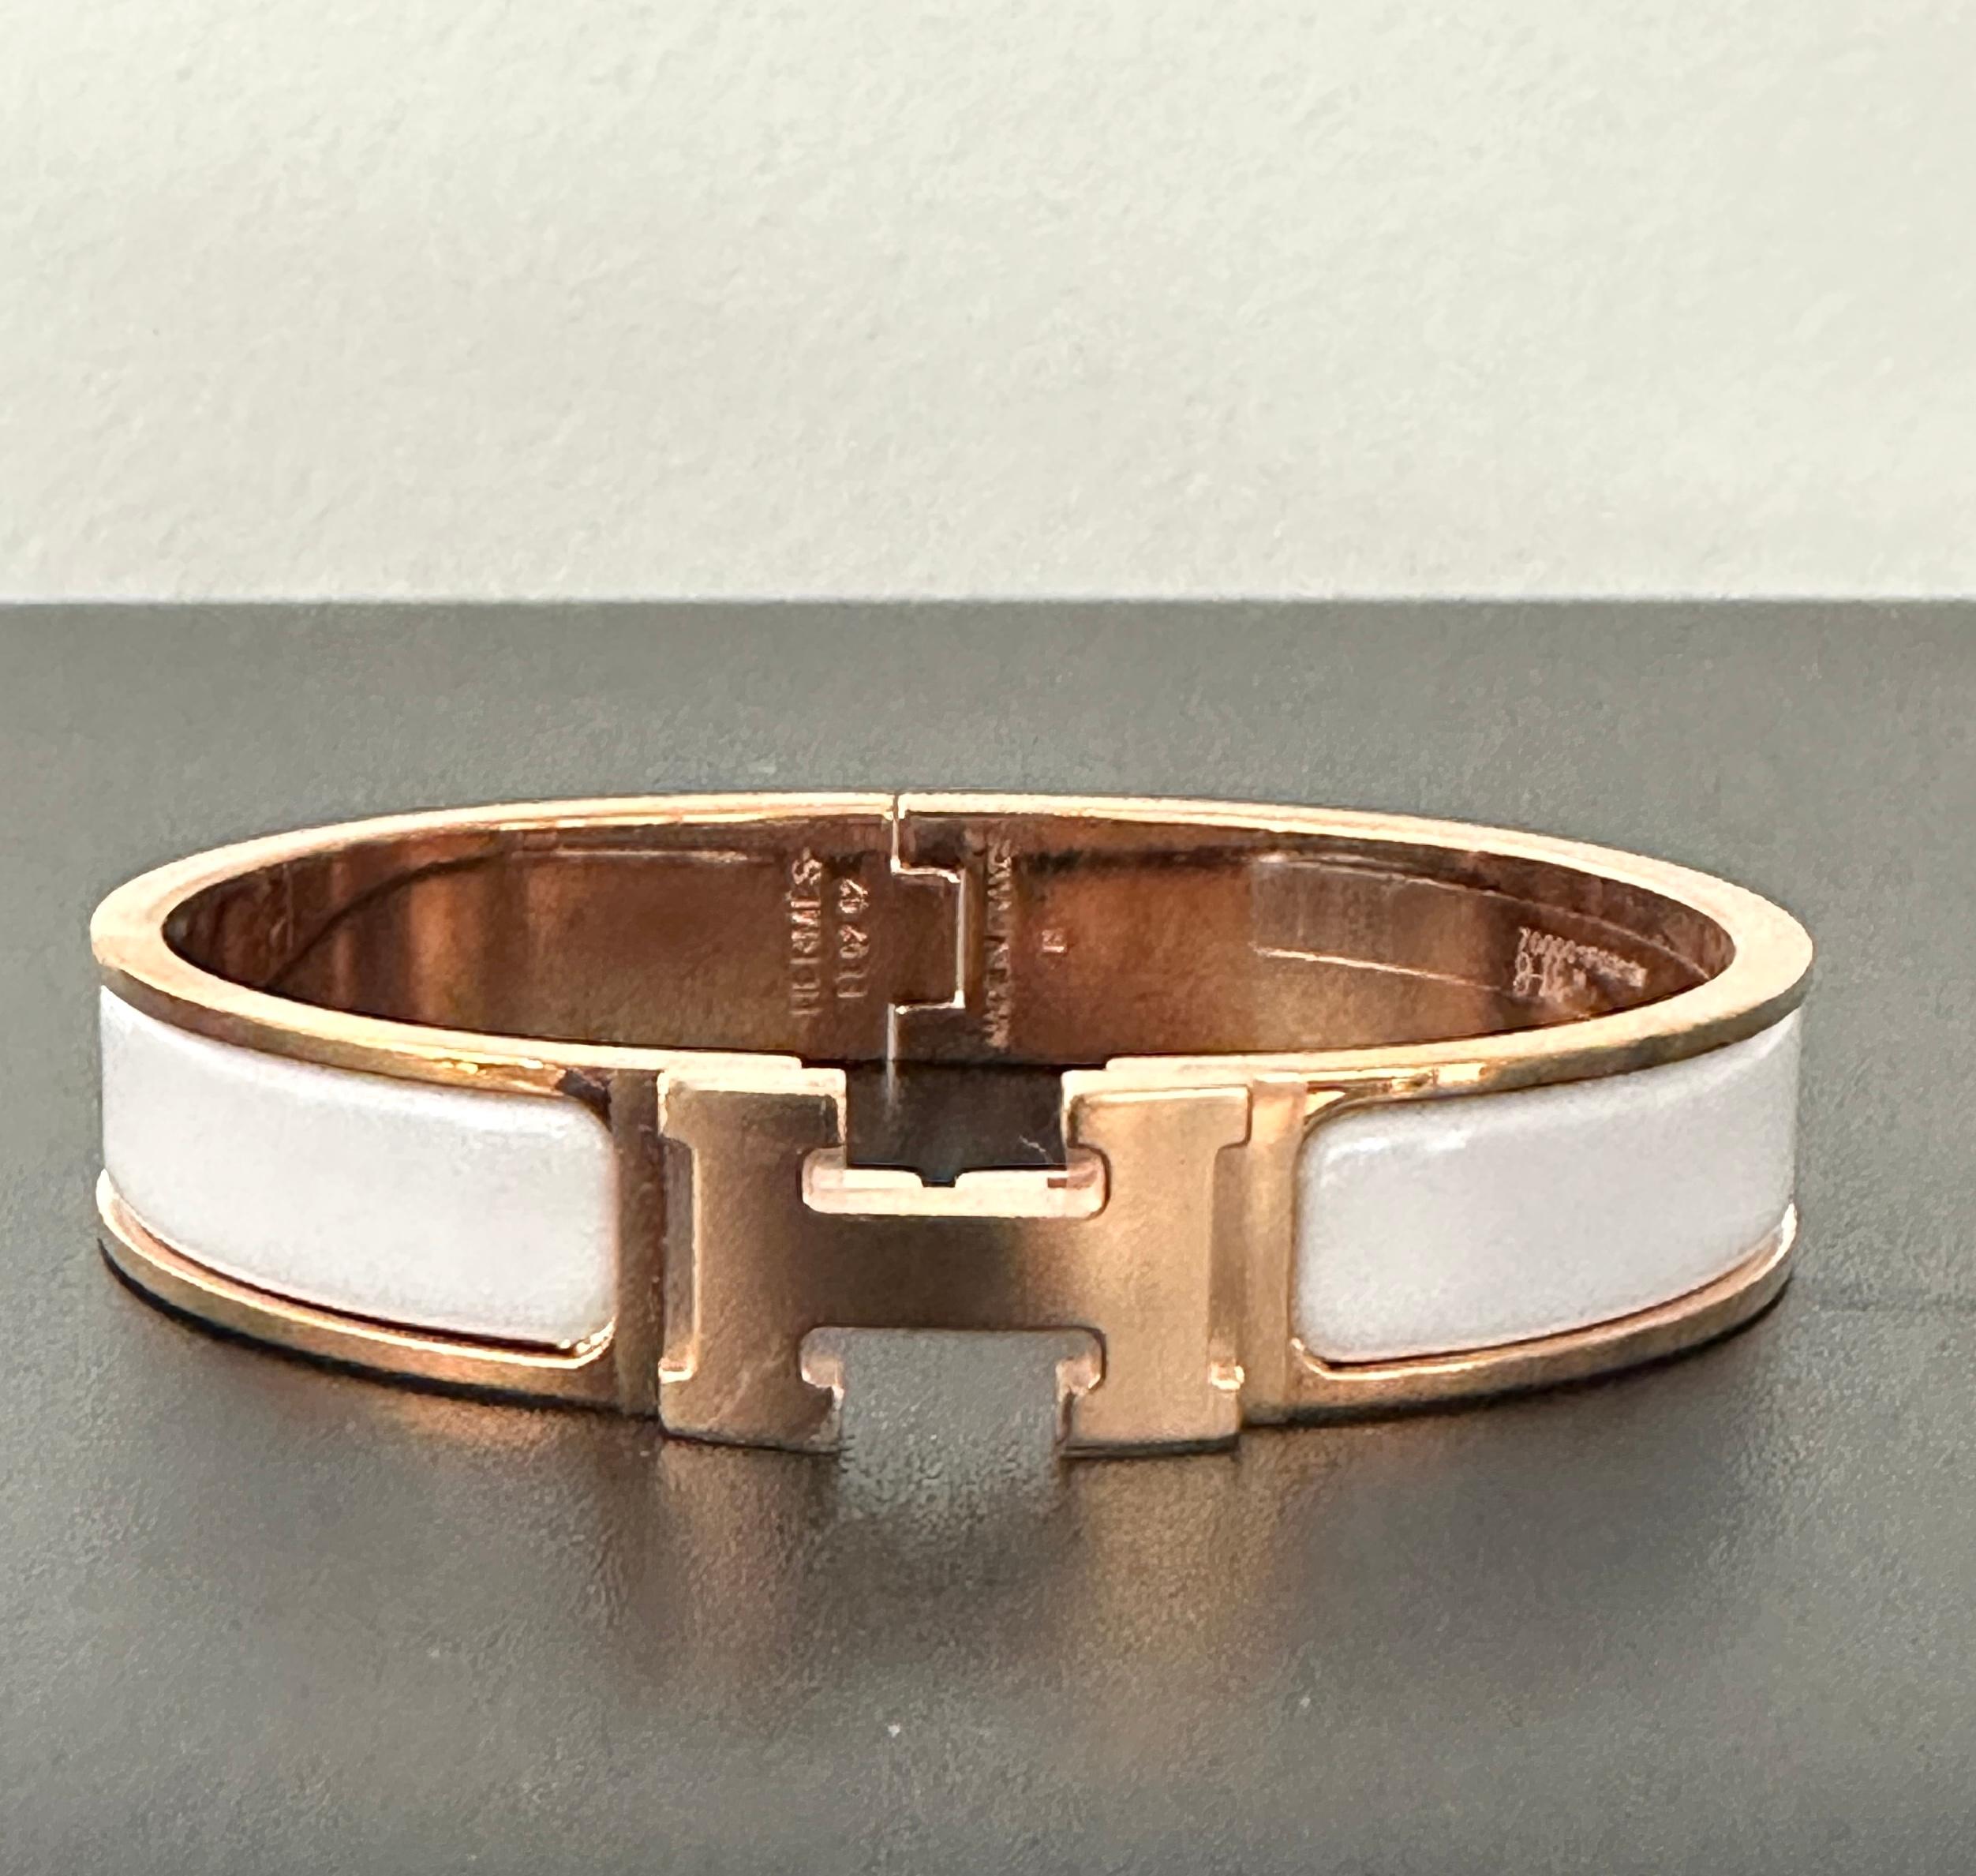 The Clic Clac H GM
GM SIZE 
Hermes bracelet in Rose Gold Plated 
Color is White
GM size, for the larger hand 
Circumference: 7.5